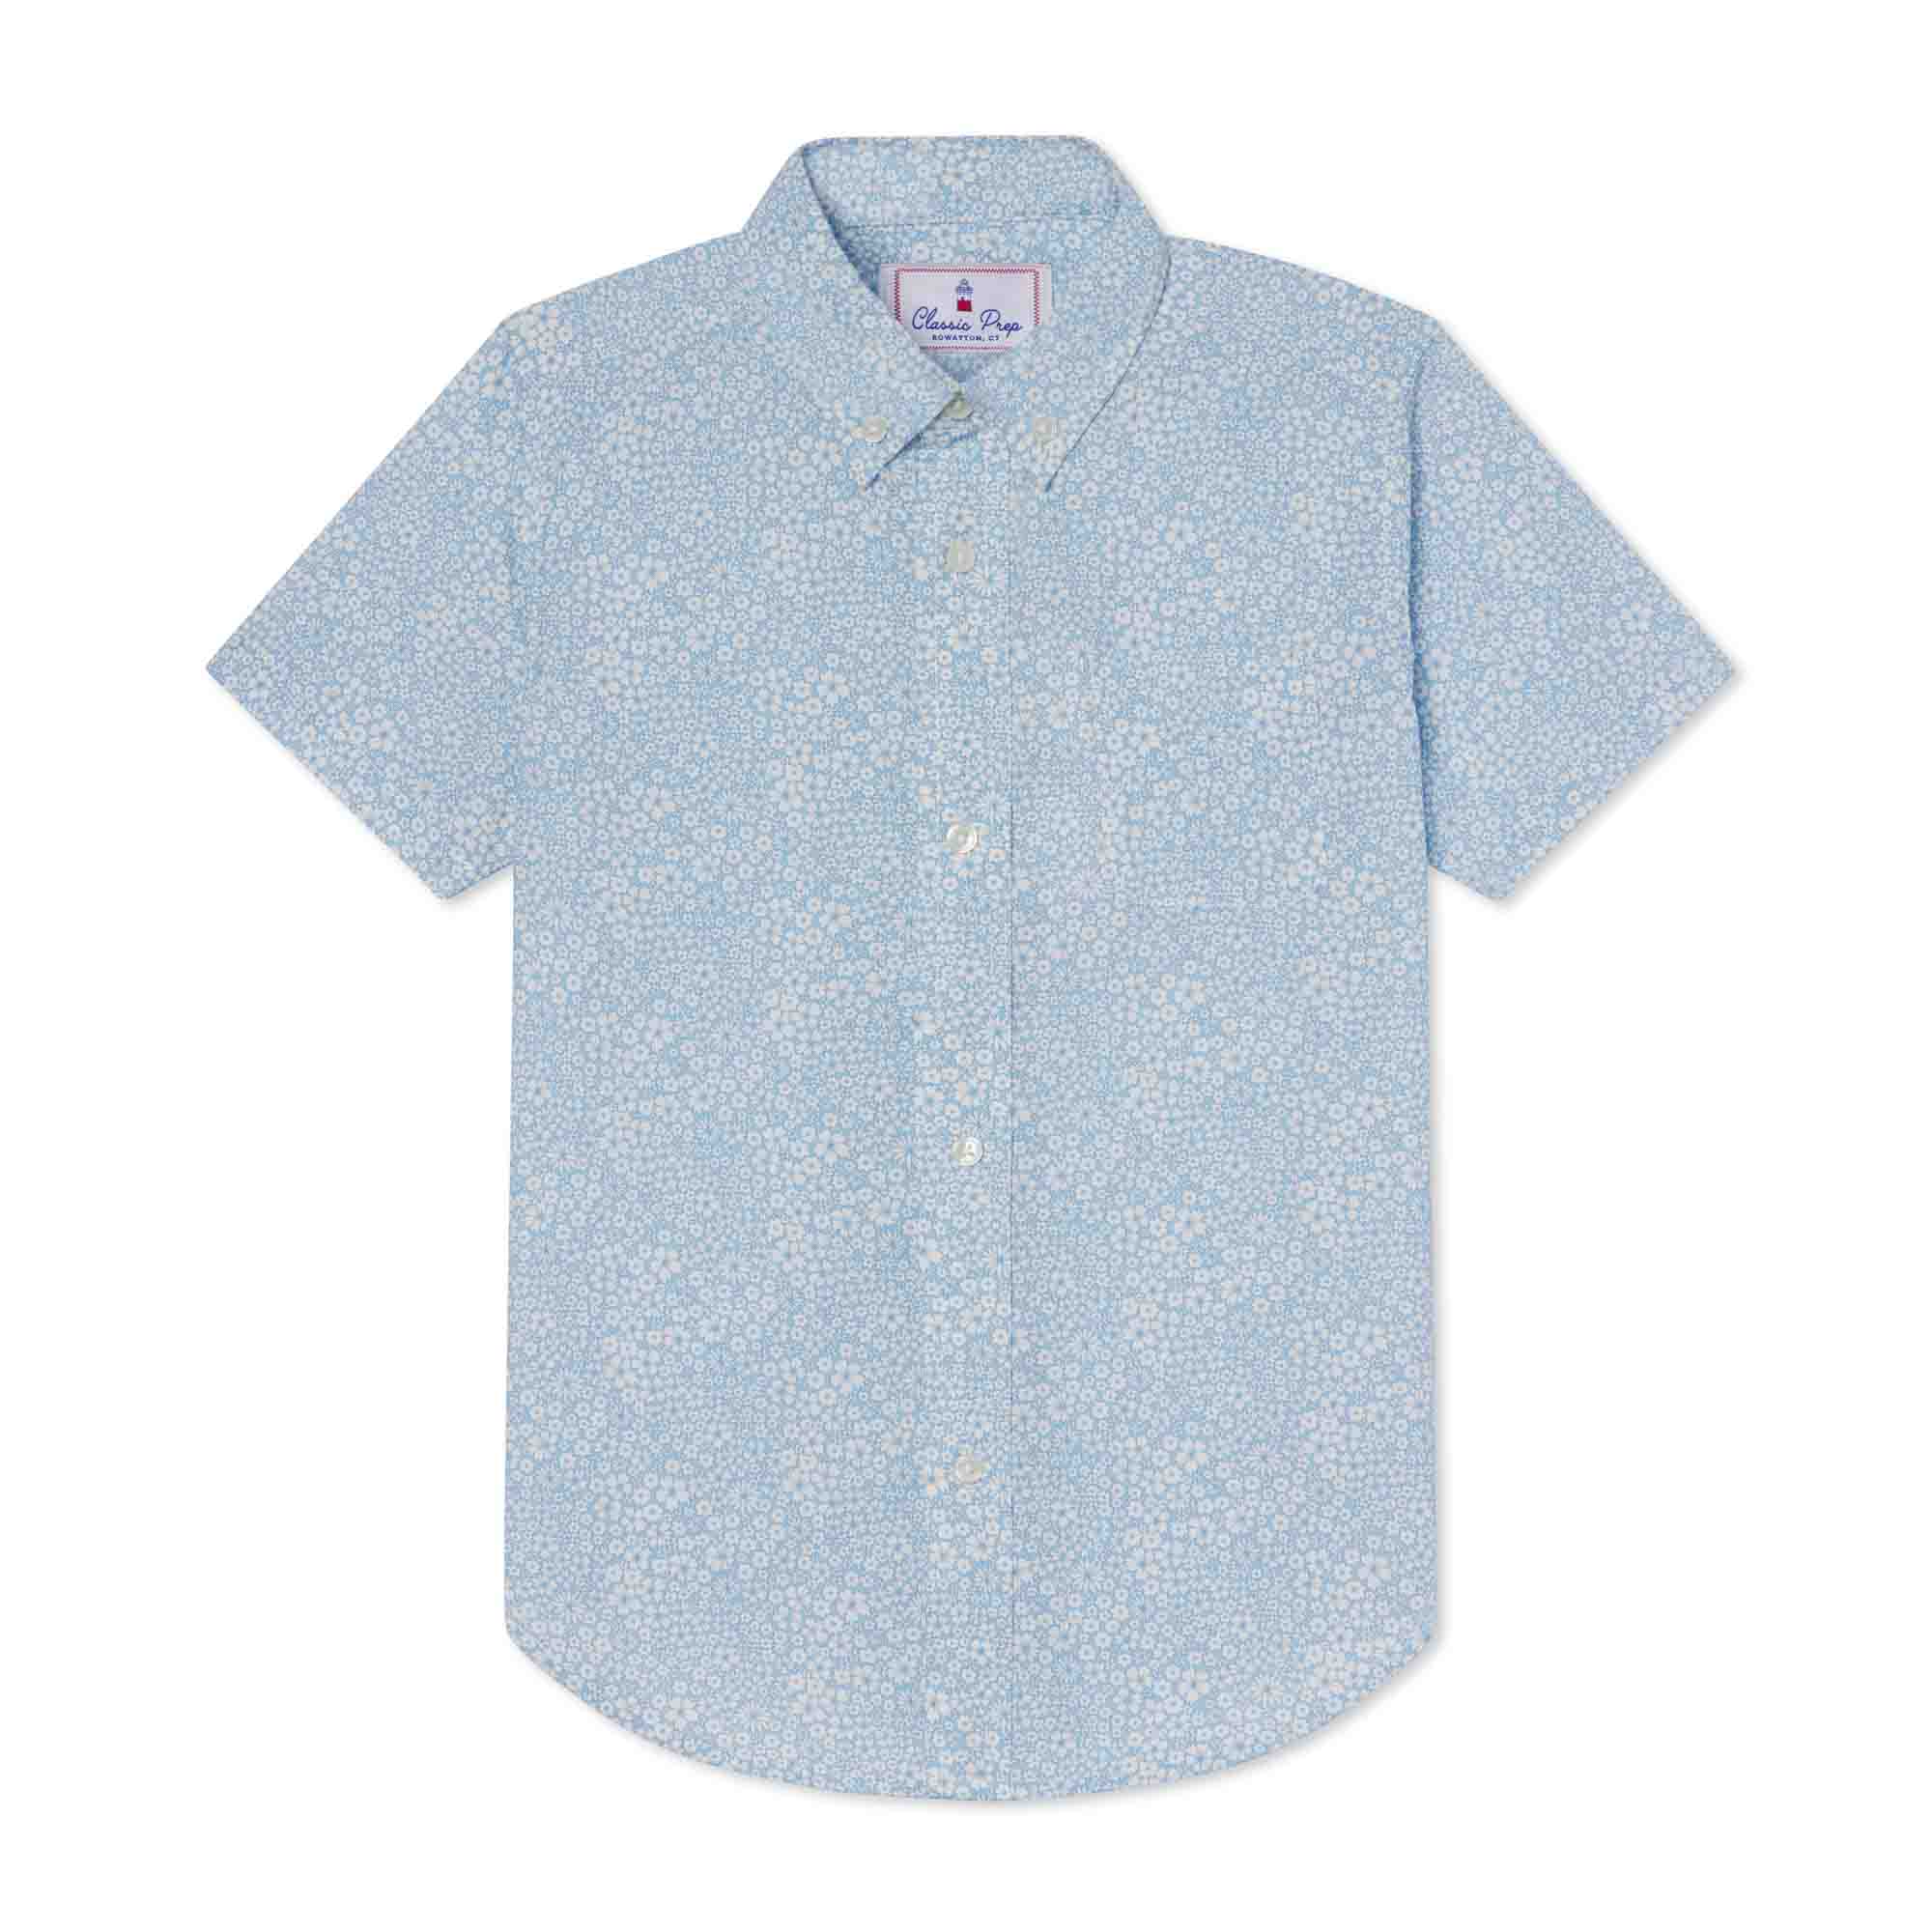 Classic and Preppy Owen Short Sleeve Buttondown, Liberty® Jacqueline's Blossom Print-Shirts and Tops-Liberty® Jacqueline's Blossom-2T-CPC - Classic Prep Childrenswear